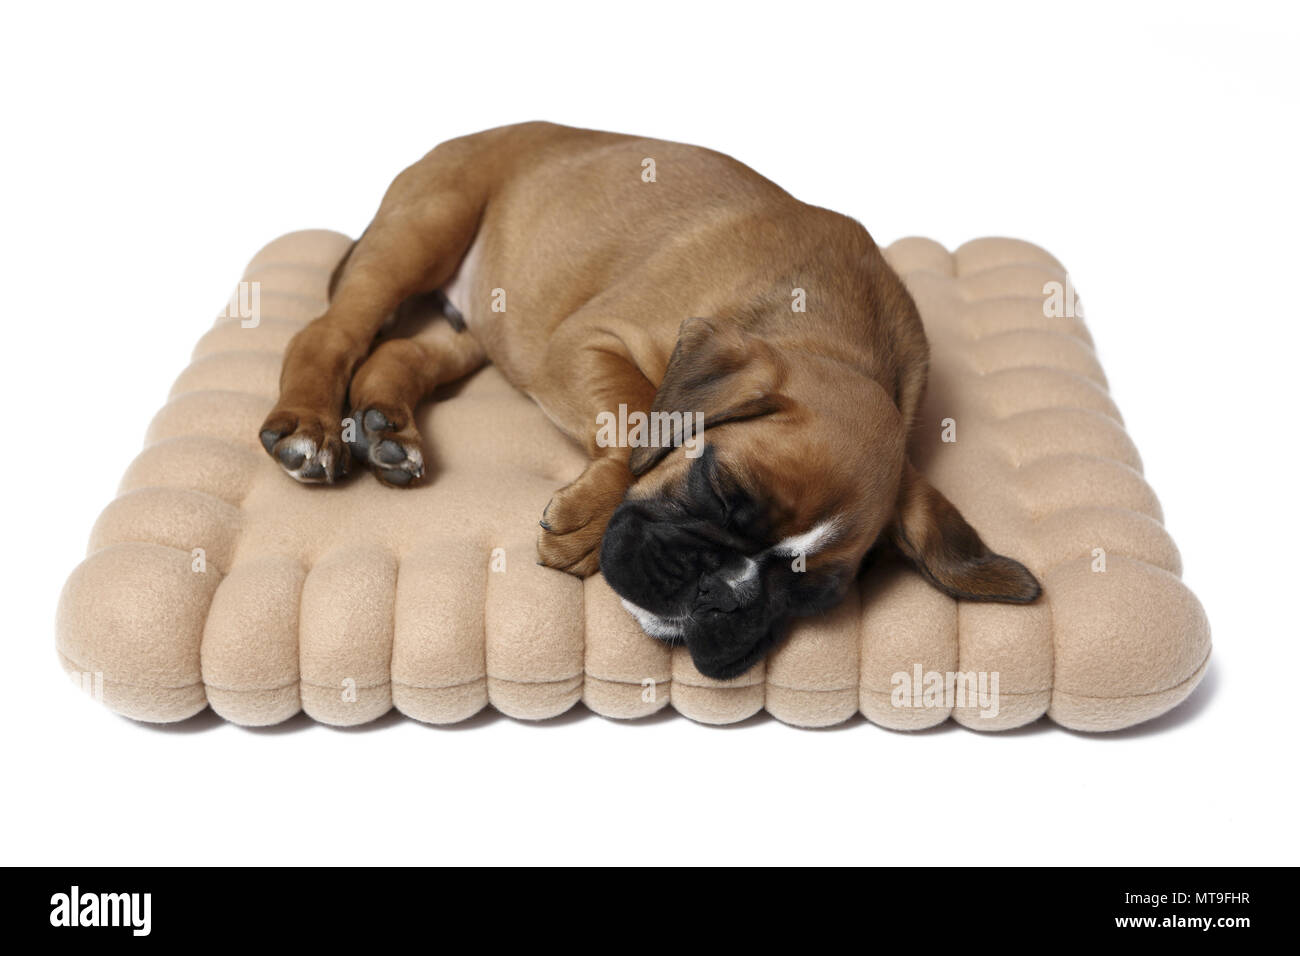 German Boxer. Puppy (7 weeks old) sleeping on a cookie-shaped cushion. Studio picture Stock Photo